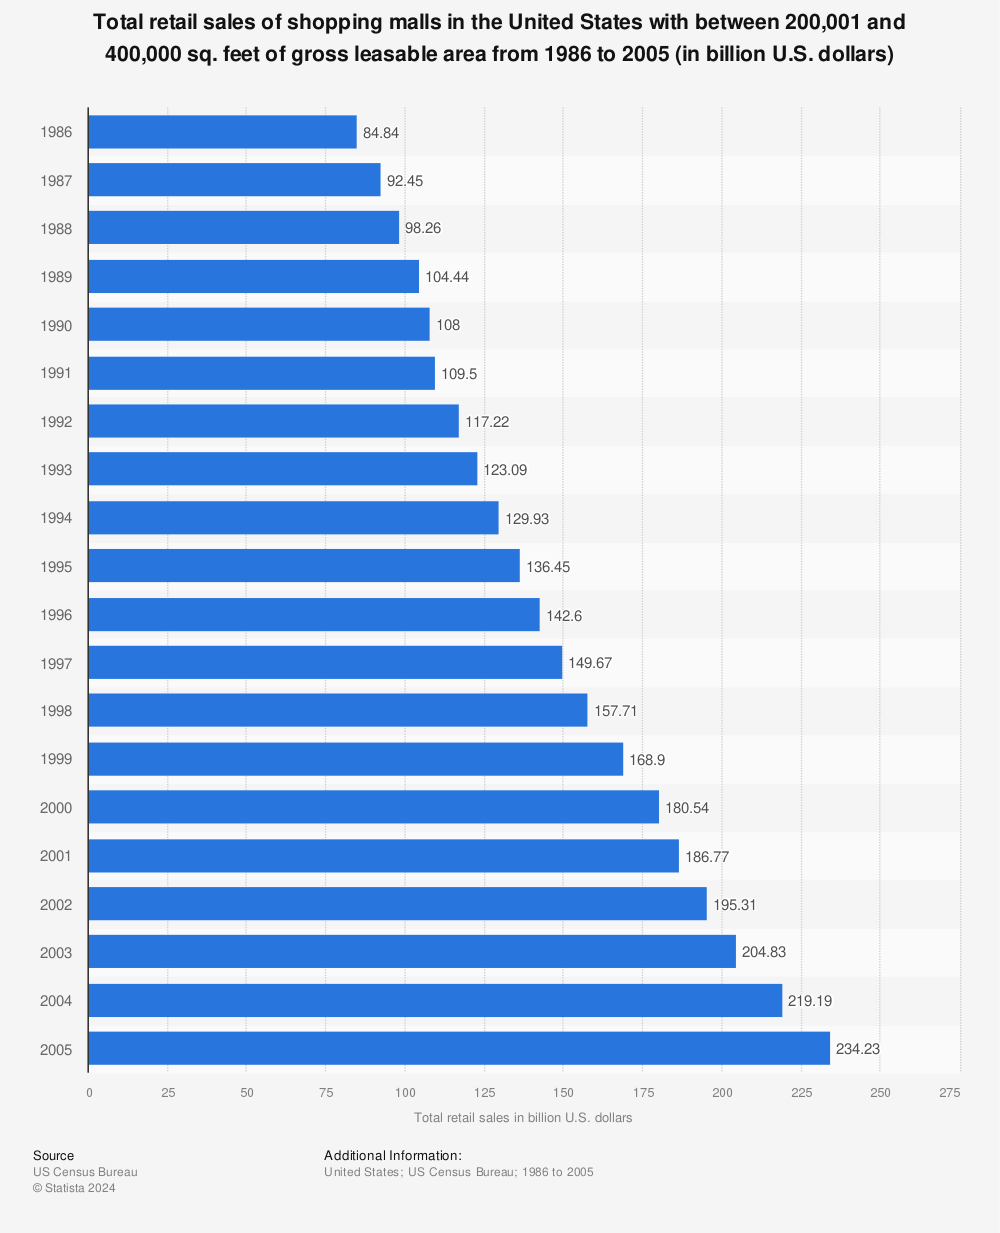 Statistic: Total retail sales of shopping malls in the United States with between 200,001 and 400,000 sq. feet of gross leasable area from 1986 to 2005 (in billion U.S. dollars) | Statista